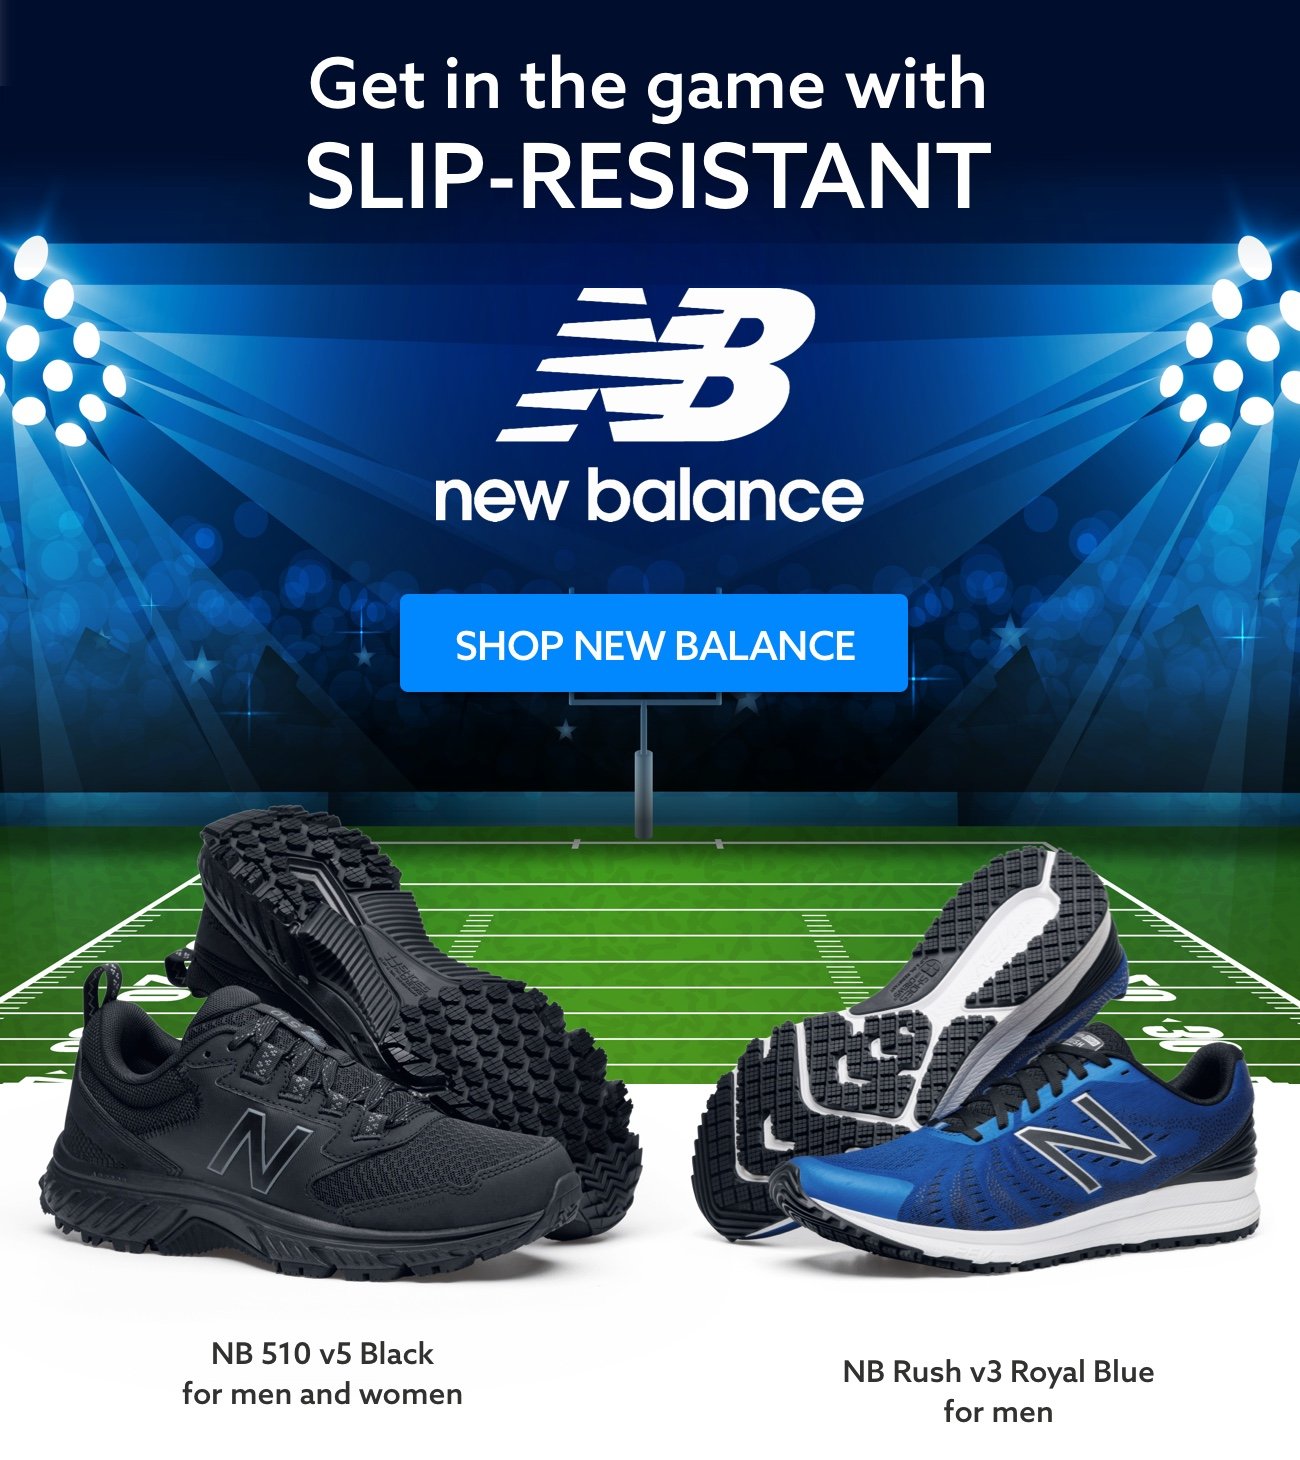 Get in the game with SLIP RESISTANT NB New Balance.